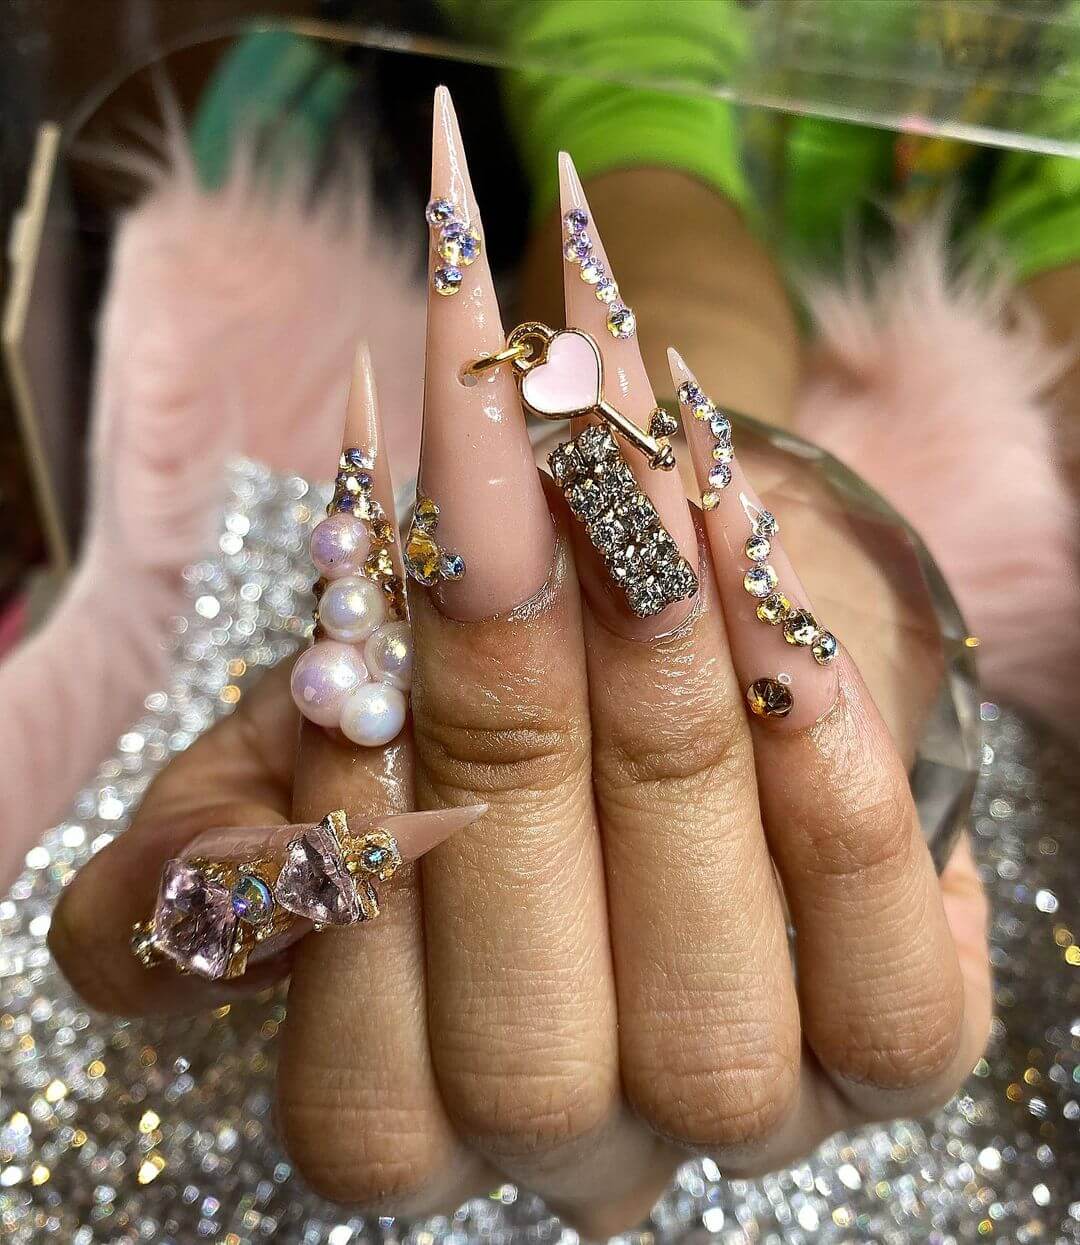 Peach 3D Nail Art Design with Pearls and Stones